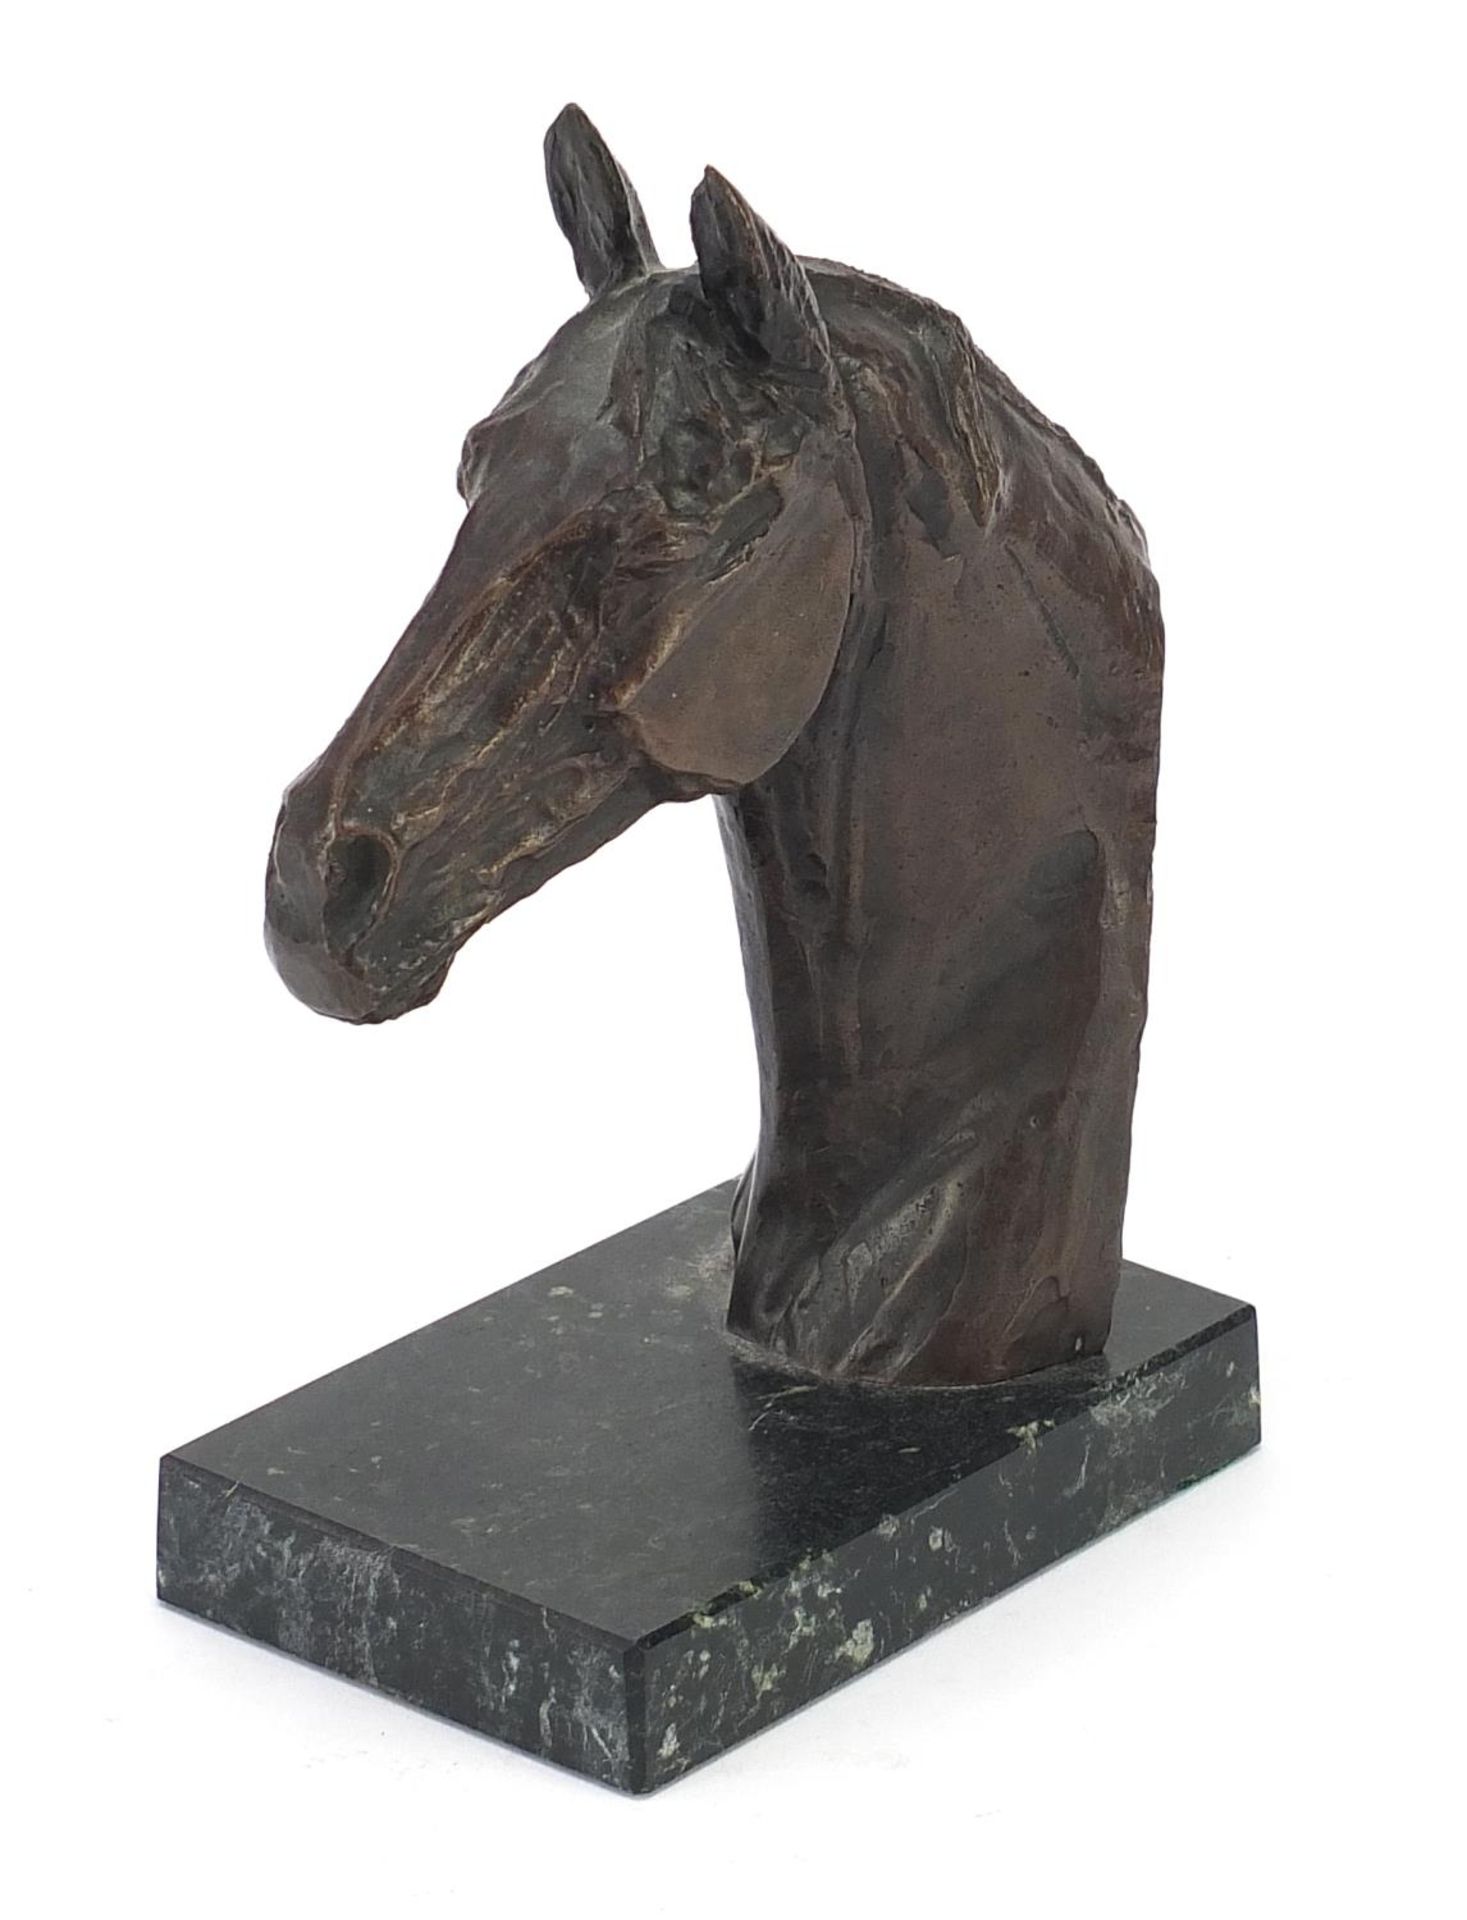 Patinated bronze horsehead raised on a rectangular marble base, 19cm high : For Further Condition